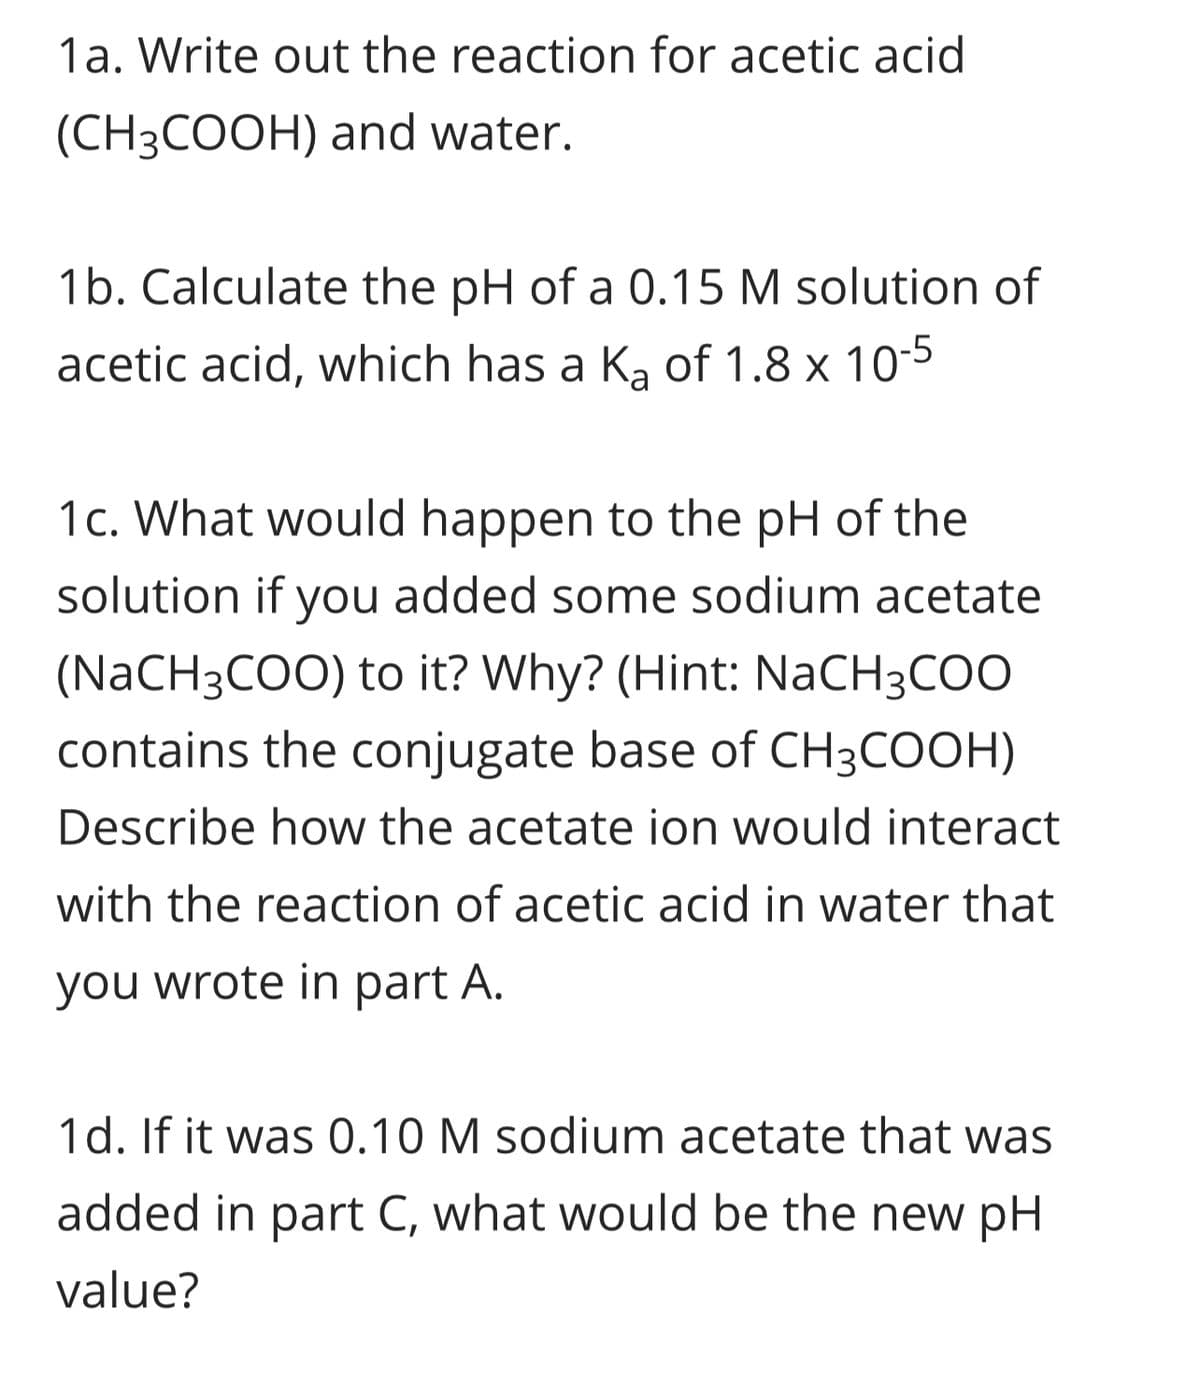 1a. Write out the reaction for acetic acid
(CH3COOH) and water.
1b. Calculate the pH of a 0.15 M solution of
acetic acid, which has a K₂ of 1.8 x 10
1c. What would happen to the pH of the
solution if you added some sodium acetate
(NaCH3COO) to it? Why? (Hint: NaCH3COO
contains the conjugate base of CH3COOH)
Describe how the acetate ion would interact
with the reaction of acetic acid in water that
you wrote in part A.
1d. If it was 0.10 M sodium acetate that was
added in part C, what would be the new pH
value?